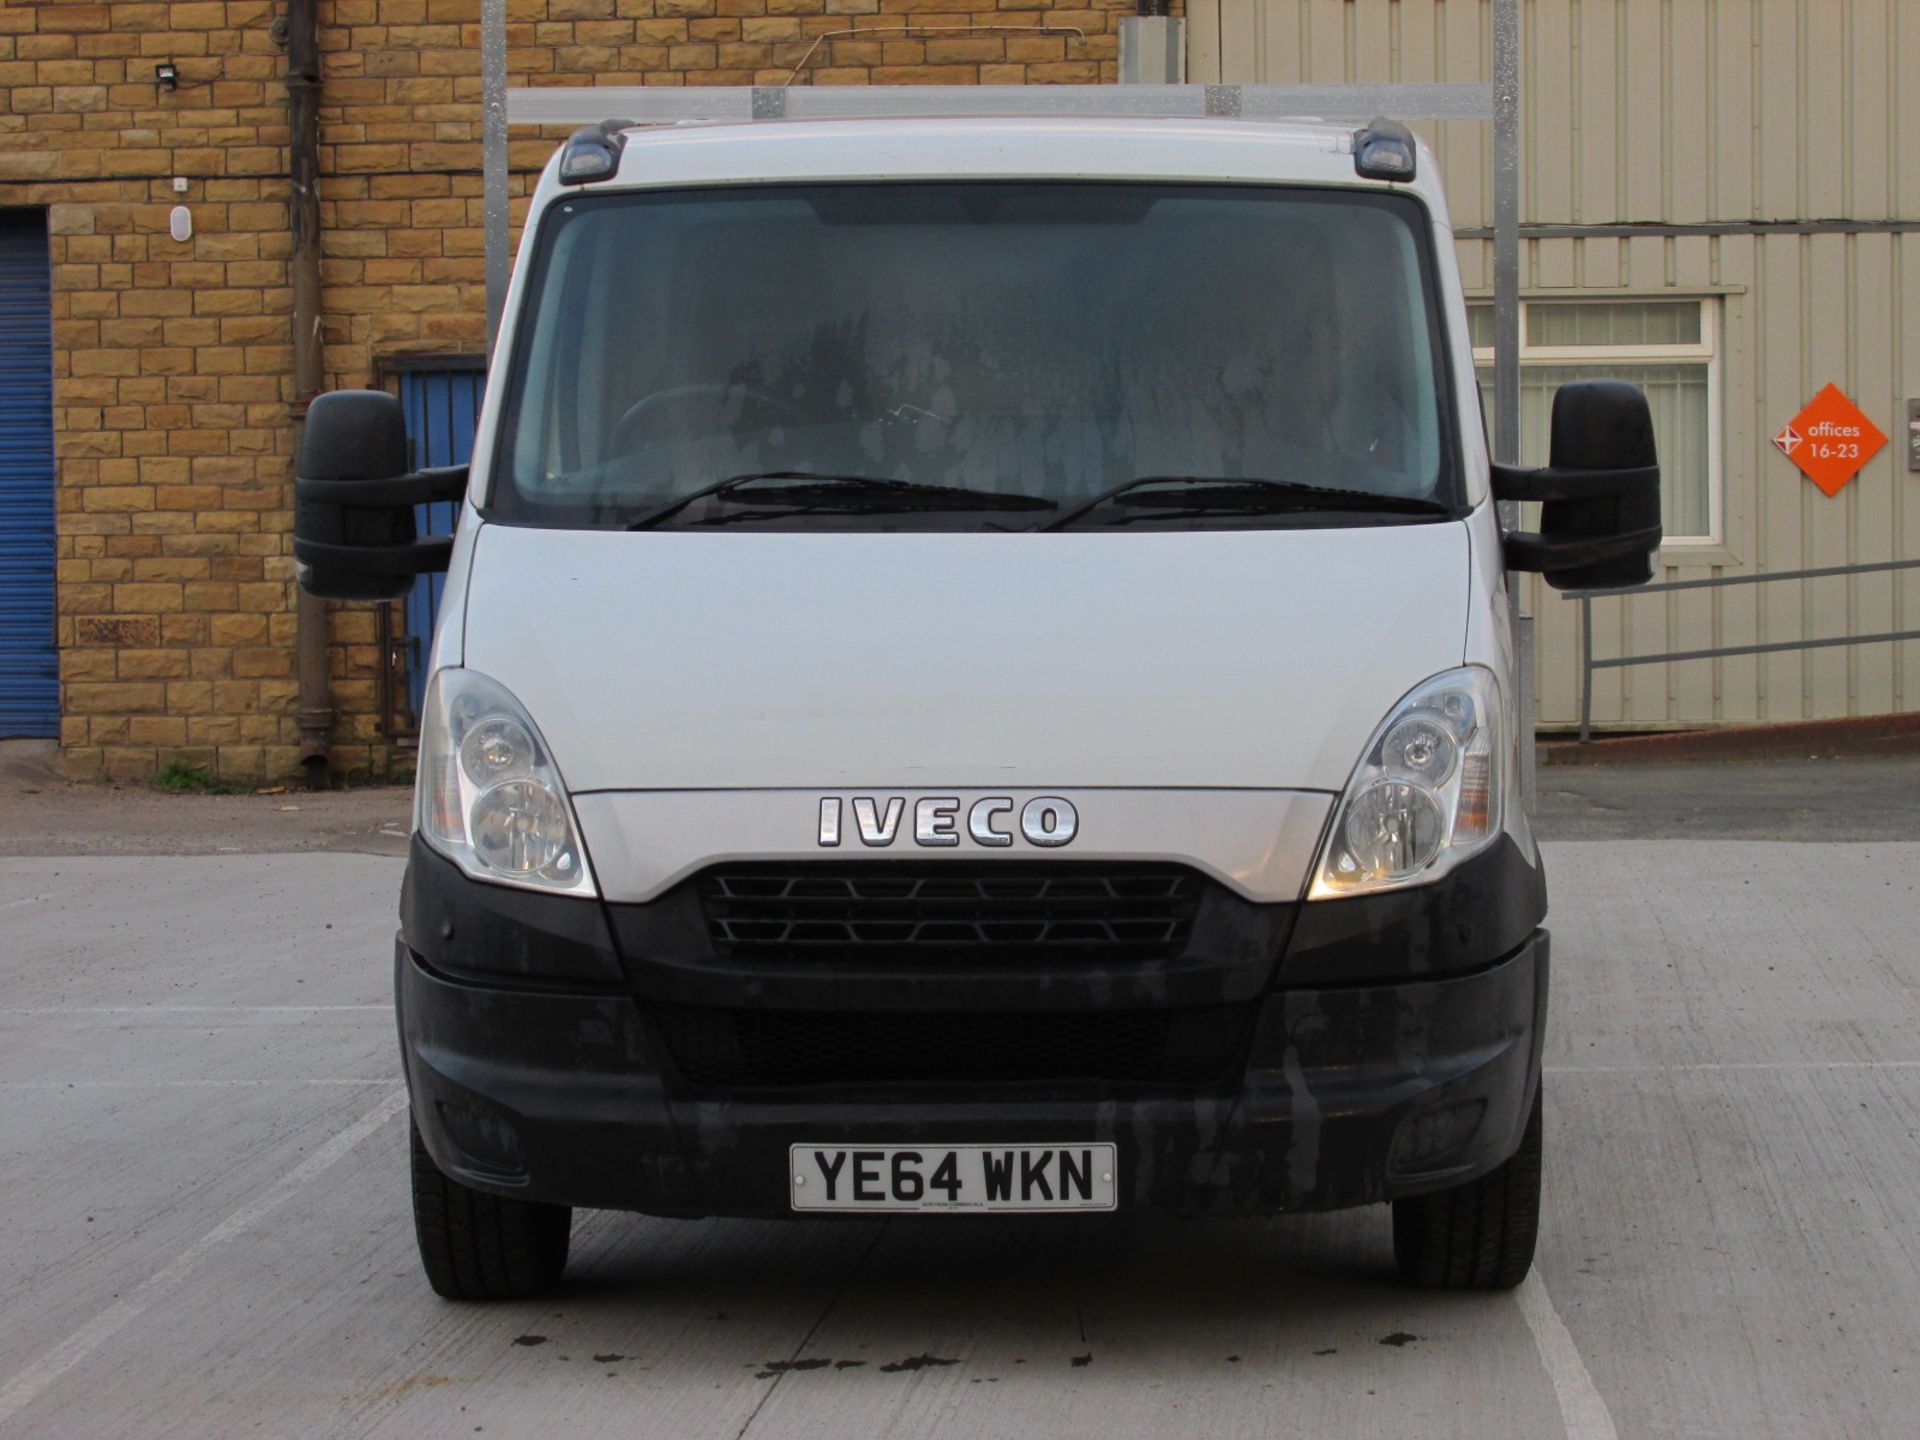 2014 Iveco Daily YE64 WKN - Image 2 of 10